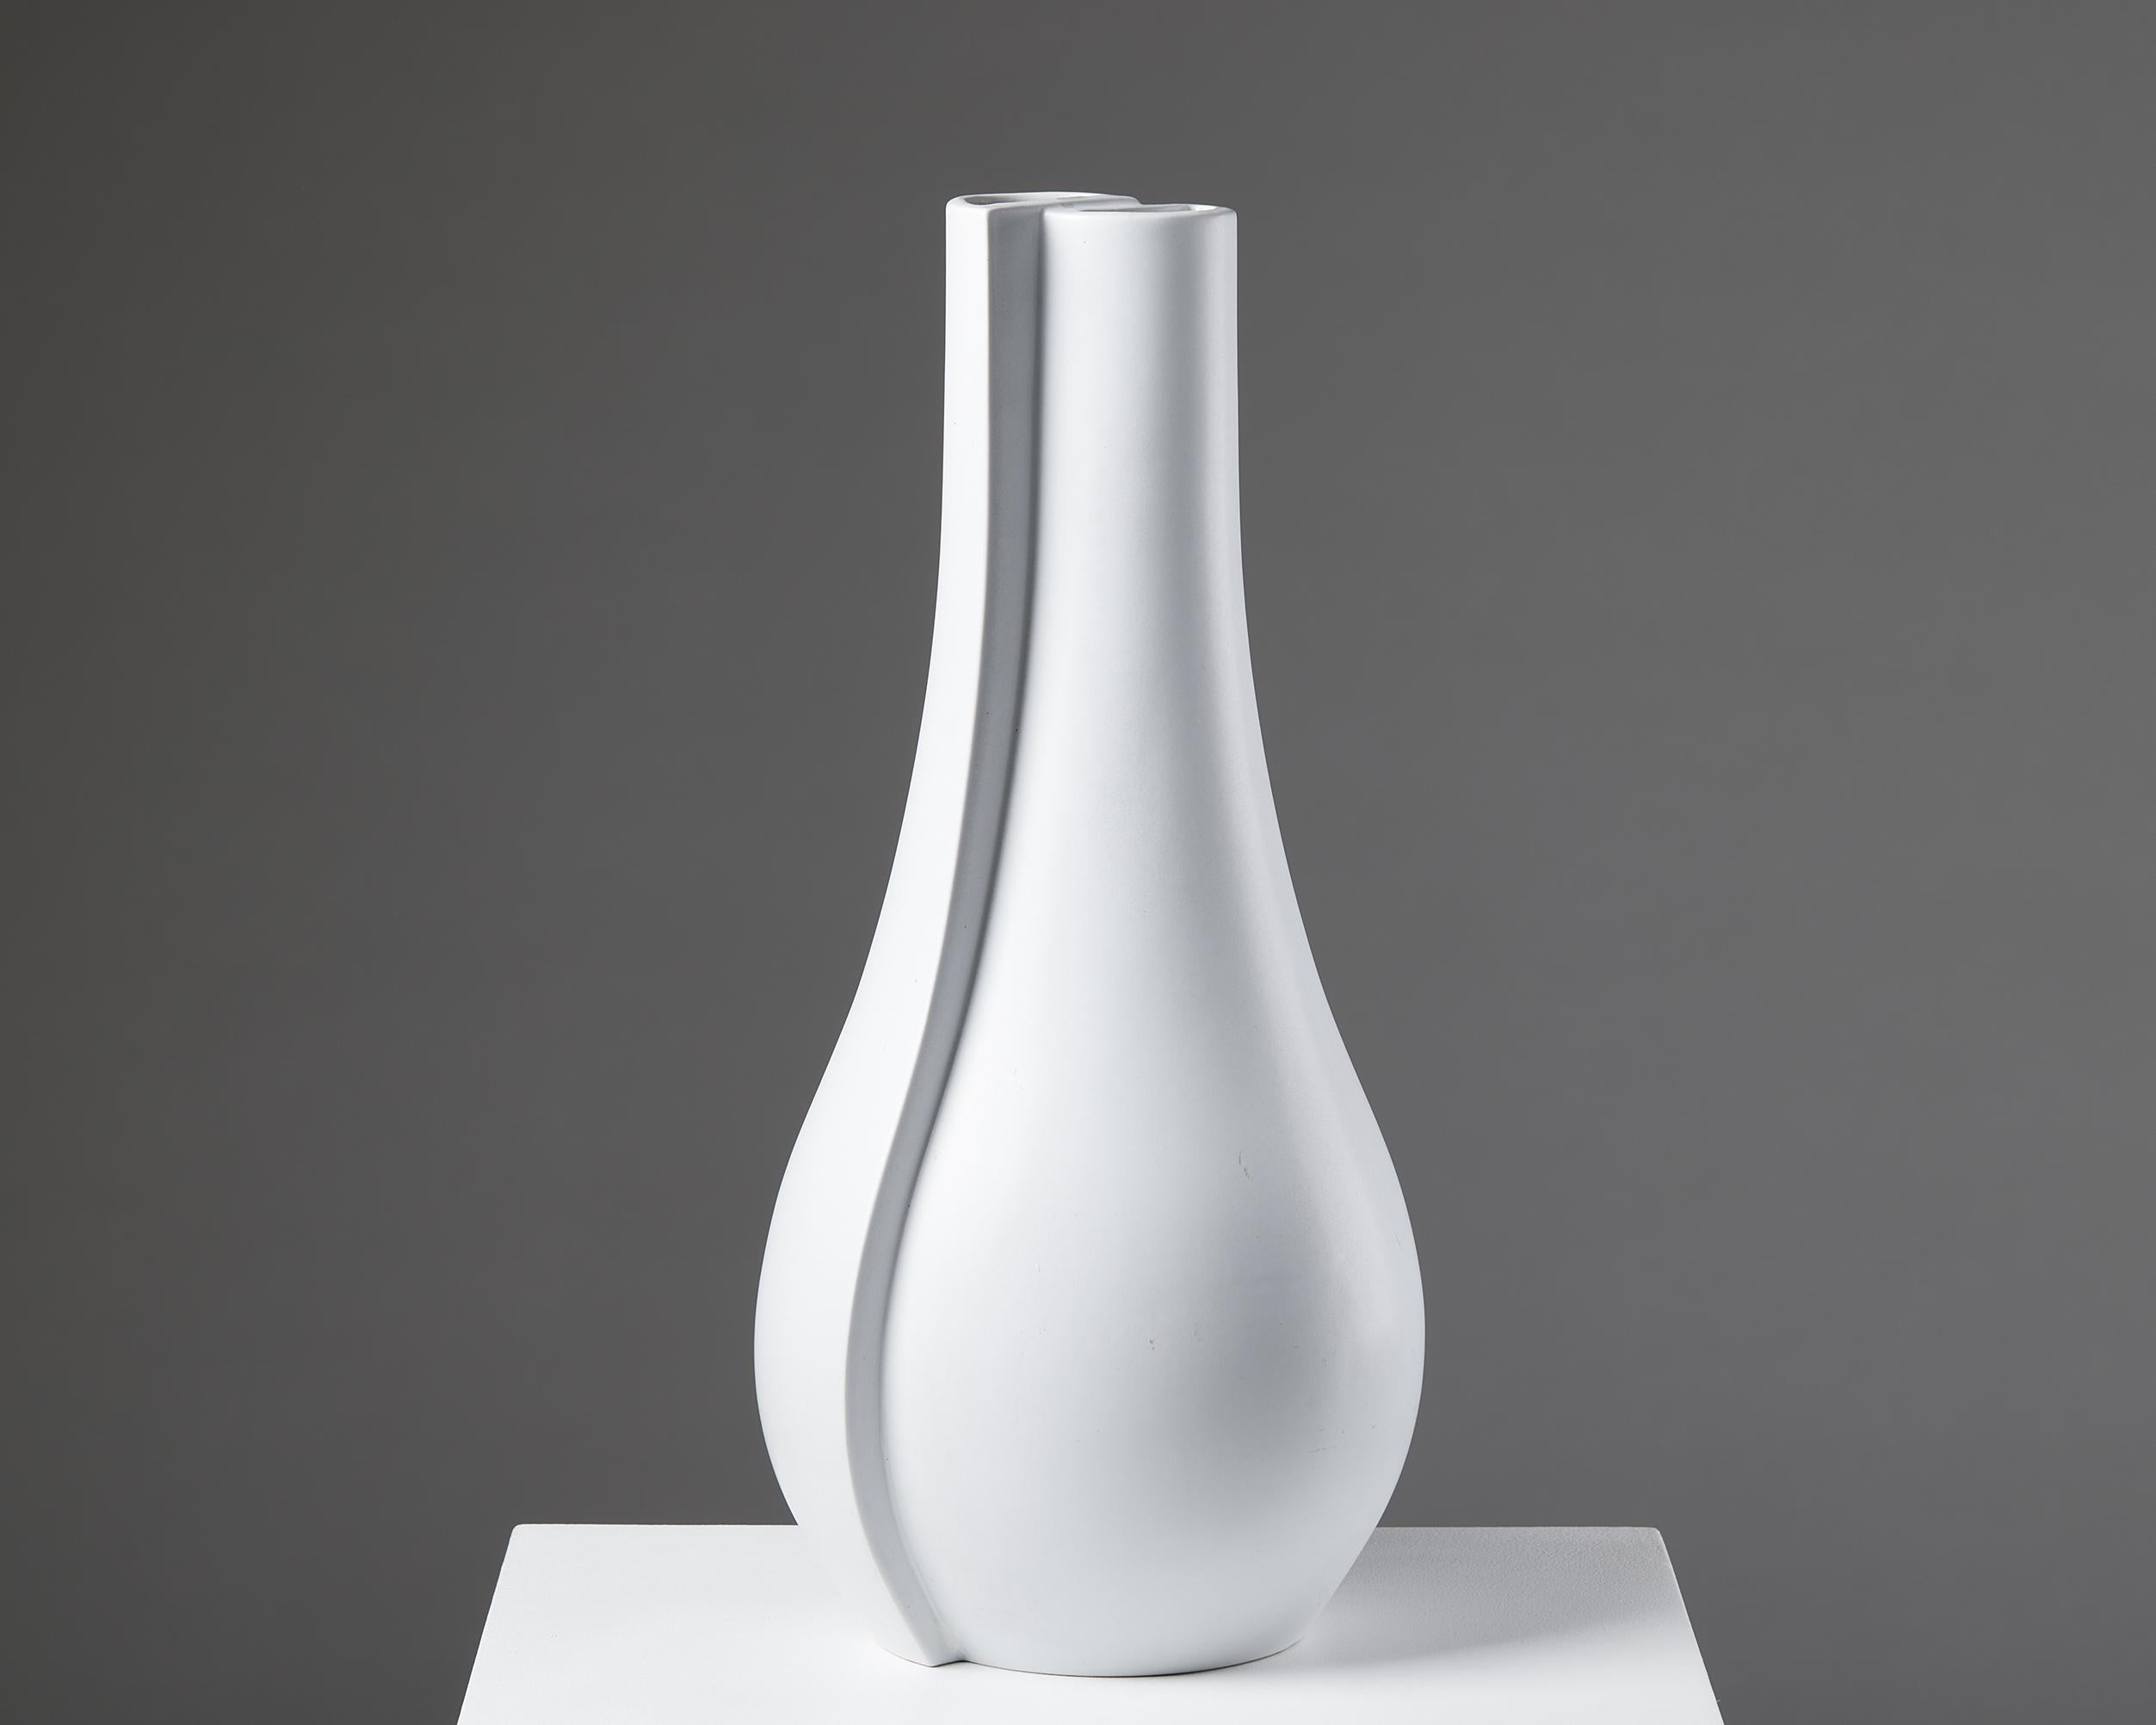 Vase ‘Surrea’ designed by Wilhelm Kåge for Gustavsberg,
Sweden, 1940s.

Stoneware with Carrara glaze.

The ‘Surrea’ vase was made by Wilhelm Kåge for Gustavsberg in 1940. The Swede began his career as a painter before becoming Gustavsberg’s artistic